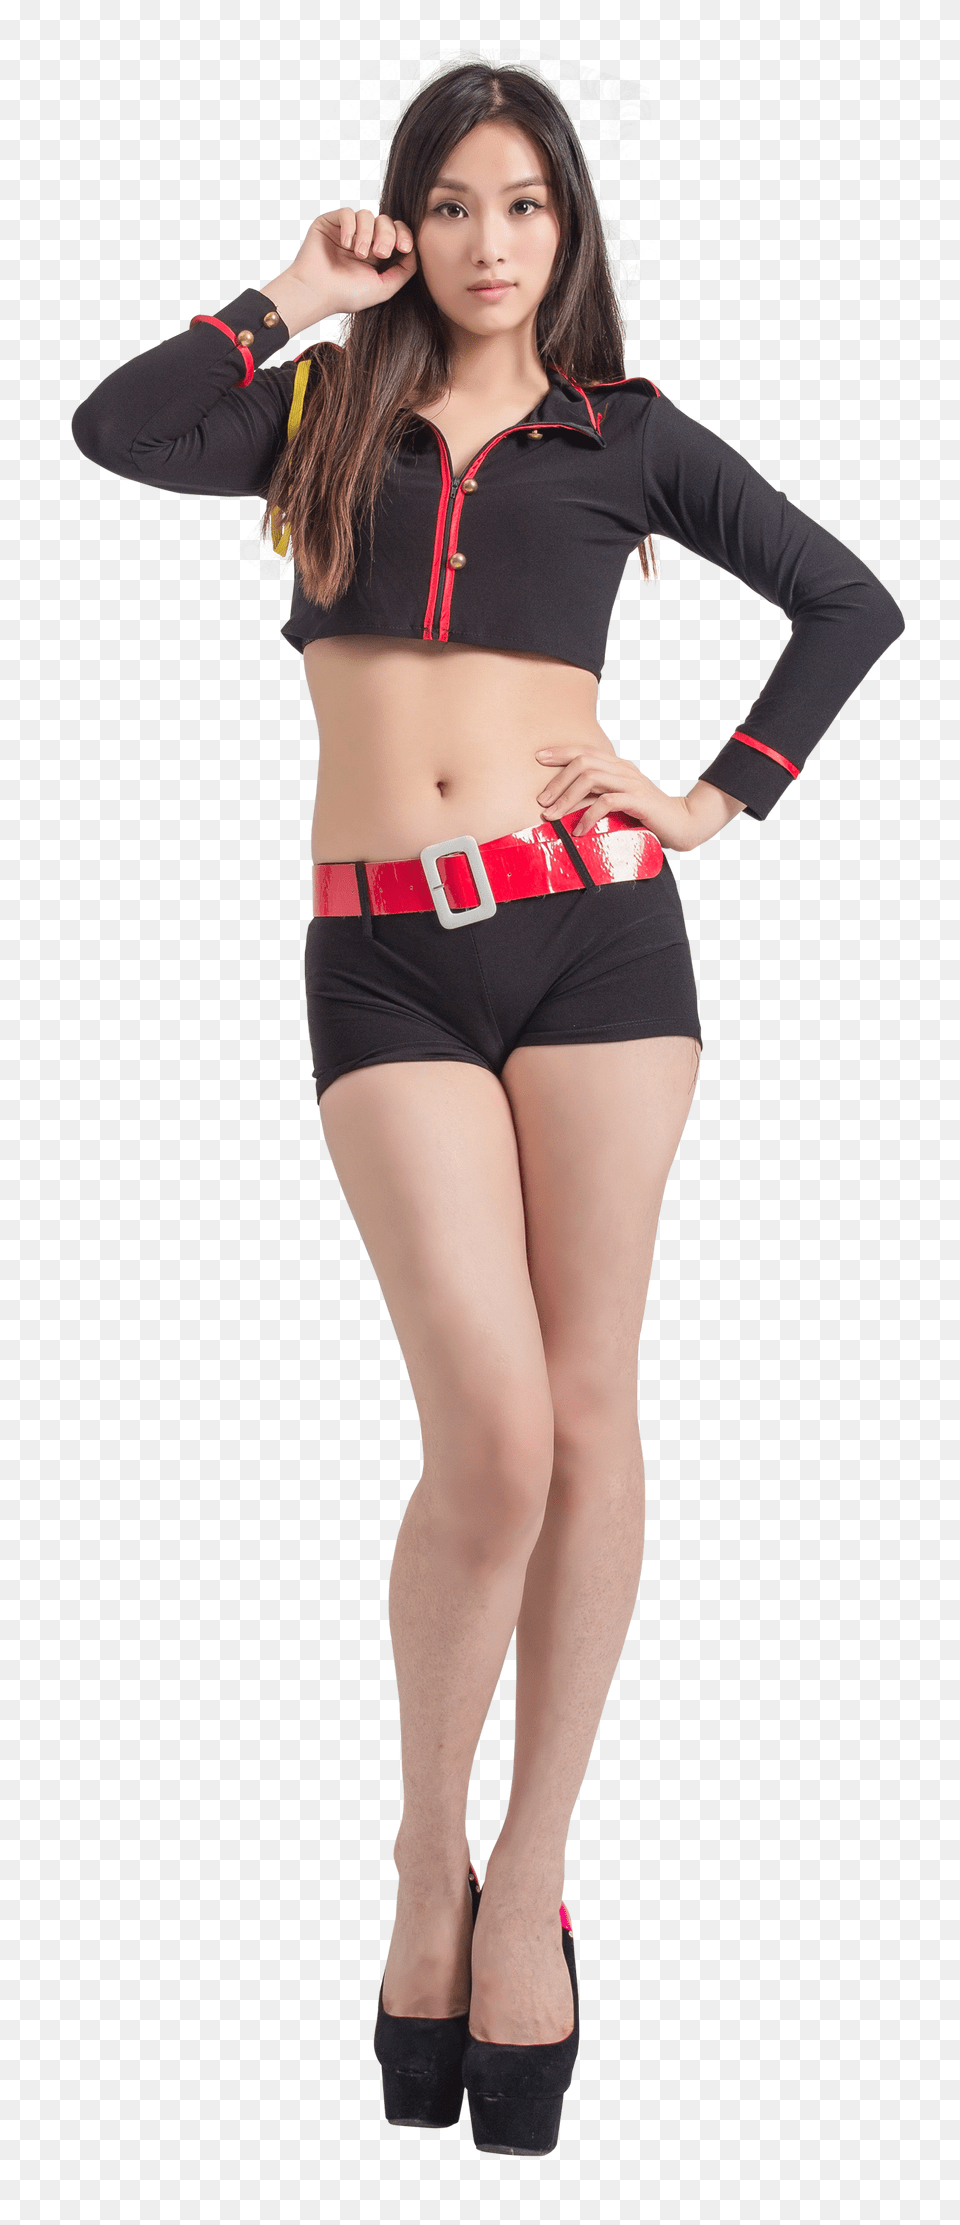 Pngpix Com Asian Young Model Woman Standing Image, Shorts, Clothing, Teen, Sleeve Free Png